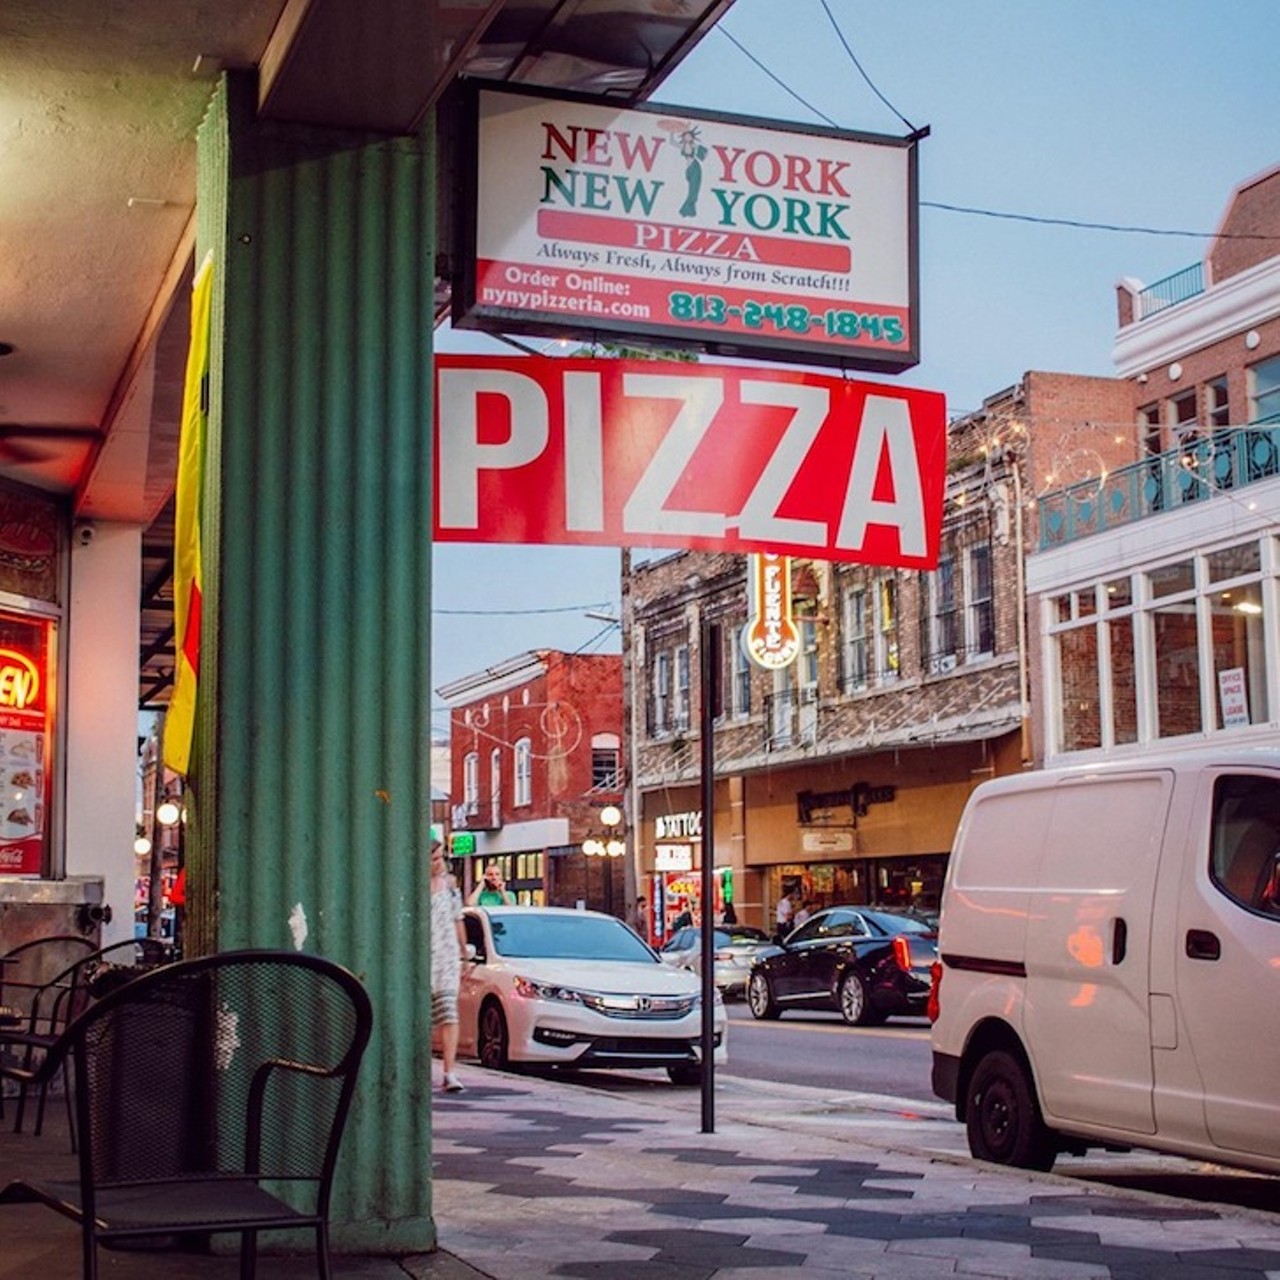 New York New York Pizza  
1512 E. Seventh Ave. Tampa
A street-side pizzeria that provides huge, deliciously greasy slices inside and from a walk-up window. Don&#146;t forget garlic knots, too. The Ybor location on Seventh Avenue is the OG, but there's a SoHo location for drunk MacDinton's nights.
Photo via New York New York/ Facebook